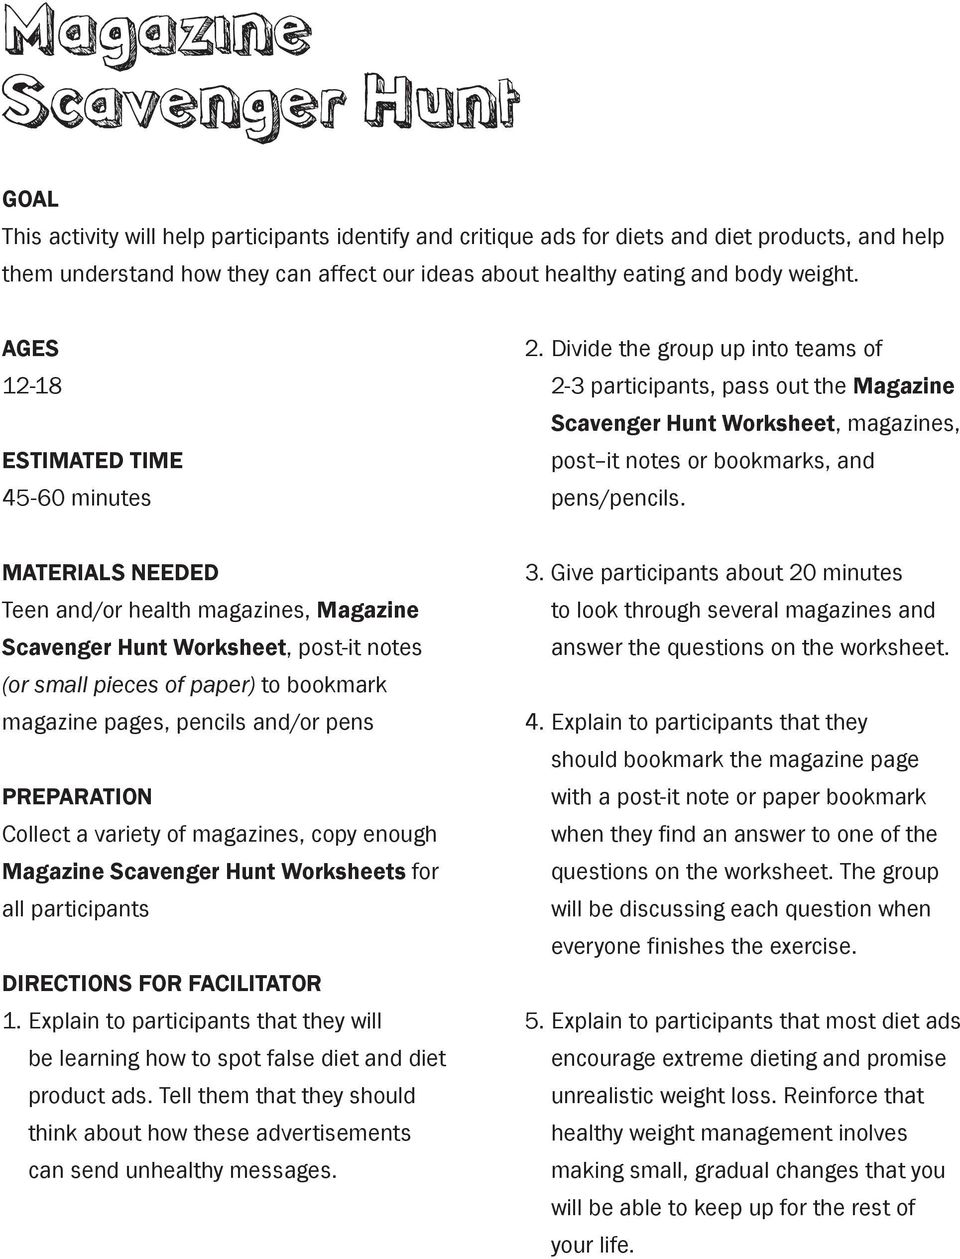 Divide the group up into teams of 2-3 participants, pass out the Magazine Scavenger Hunt Worksheet, magazines, post it notes or bookmarks, and pens/pencils.